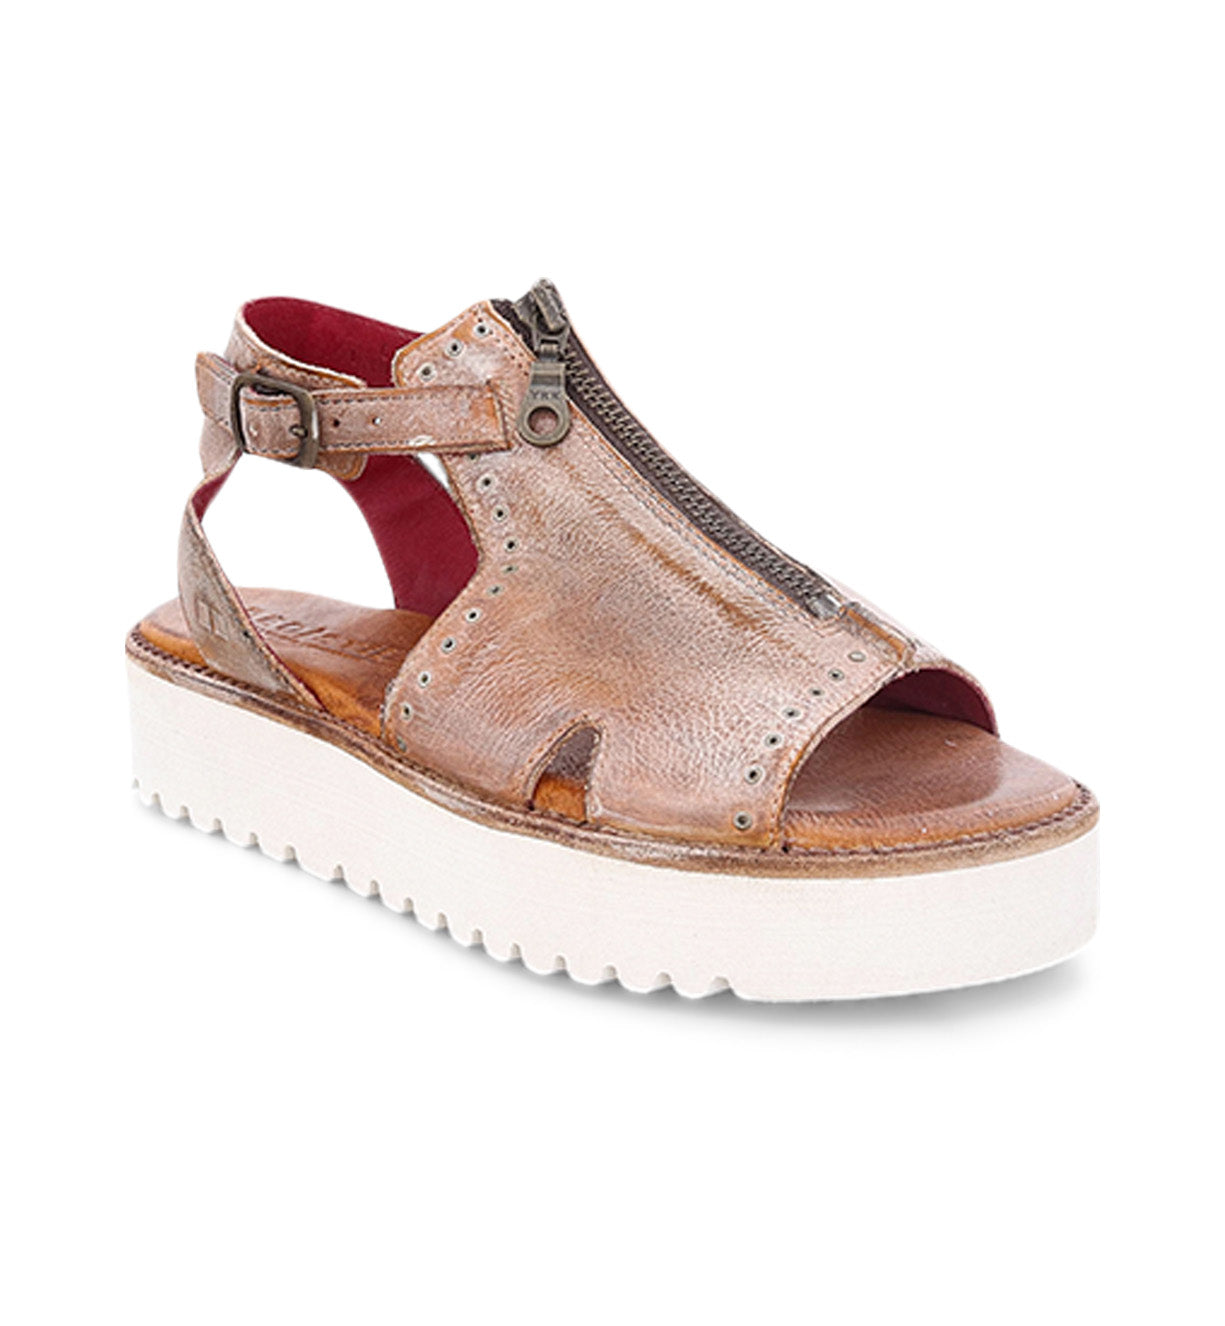 A Clancy tan pure leather sandal with white sole by Bed Stu.